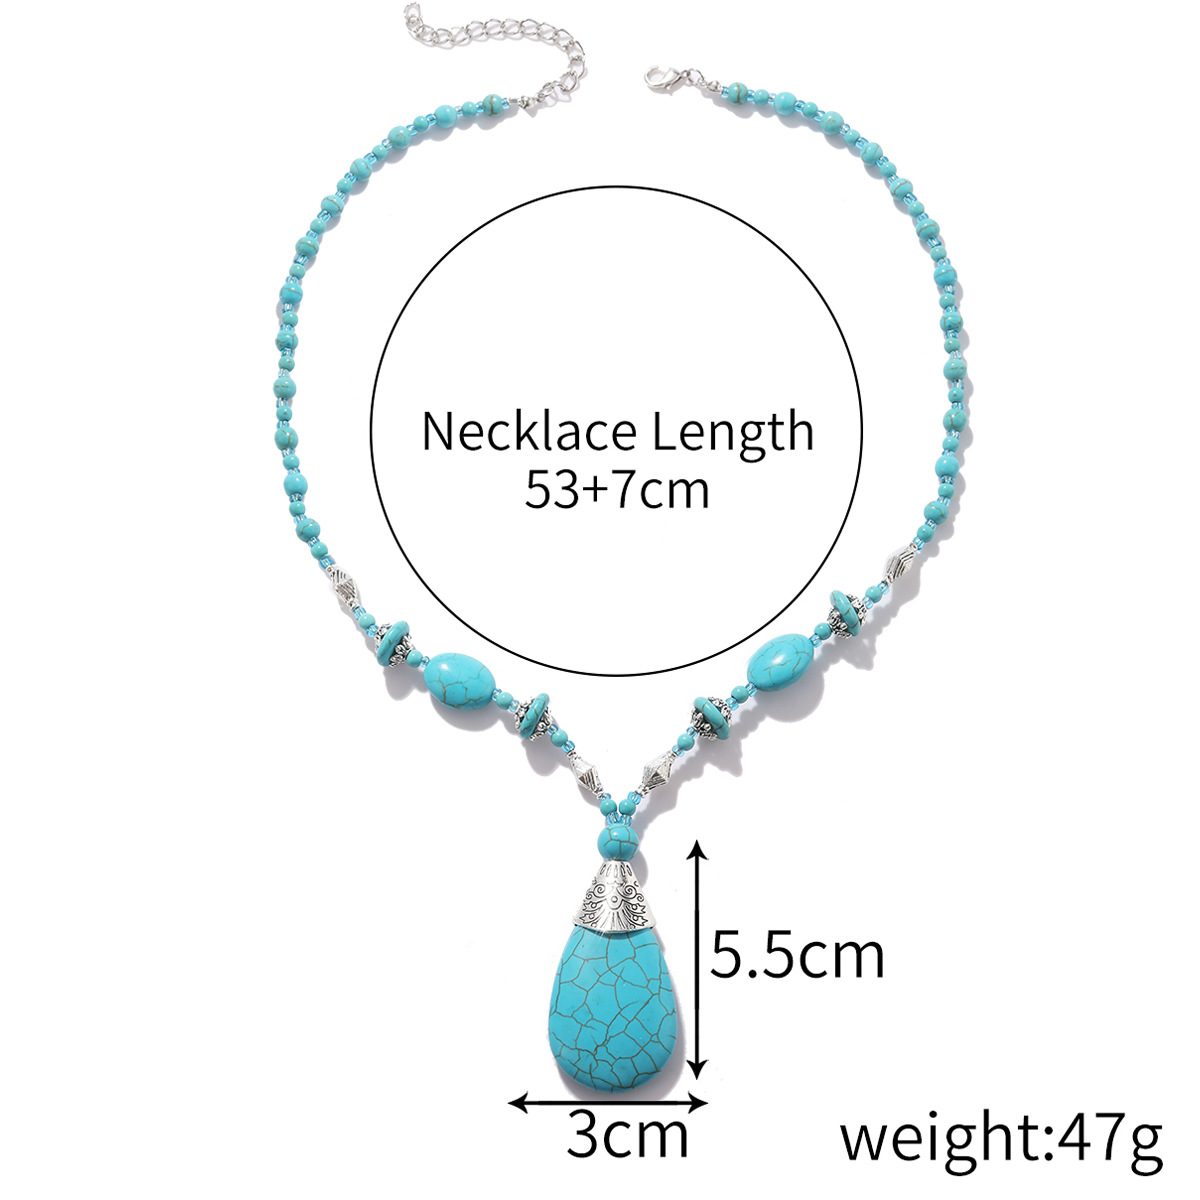 2:Necklace